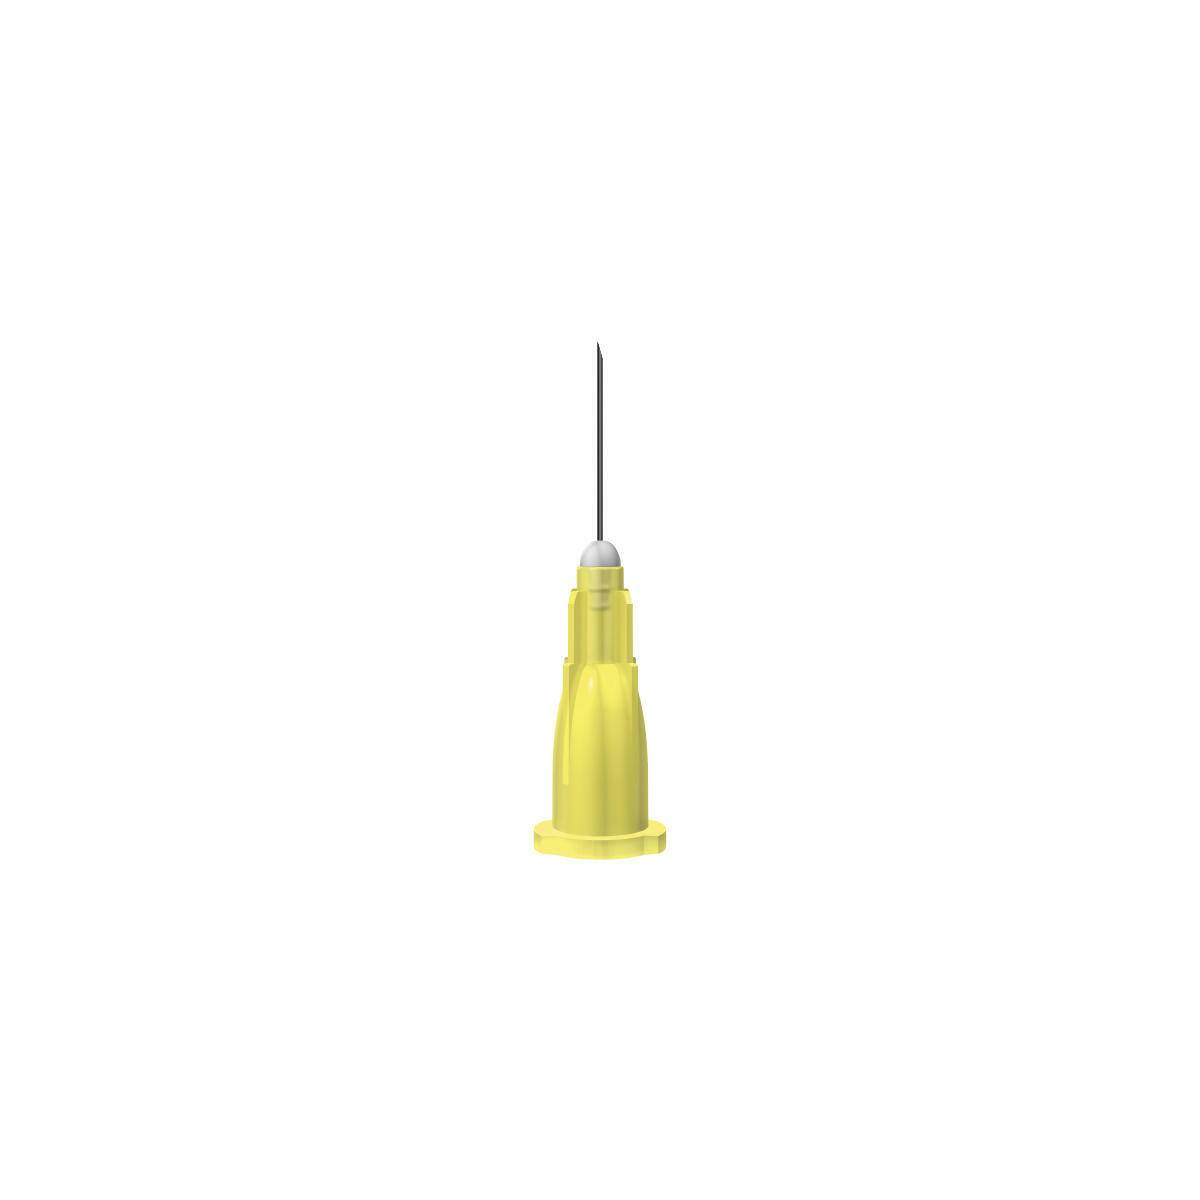 30g Yellow 12mm Meso-relle Extra ThinWall Needle